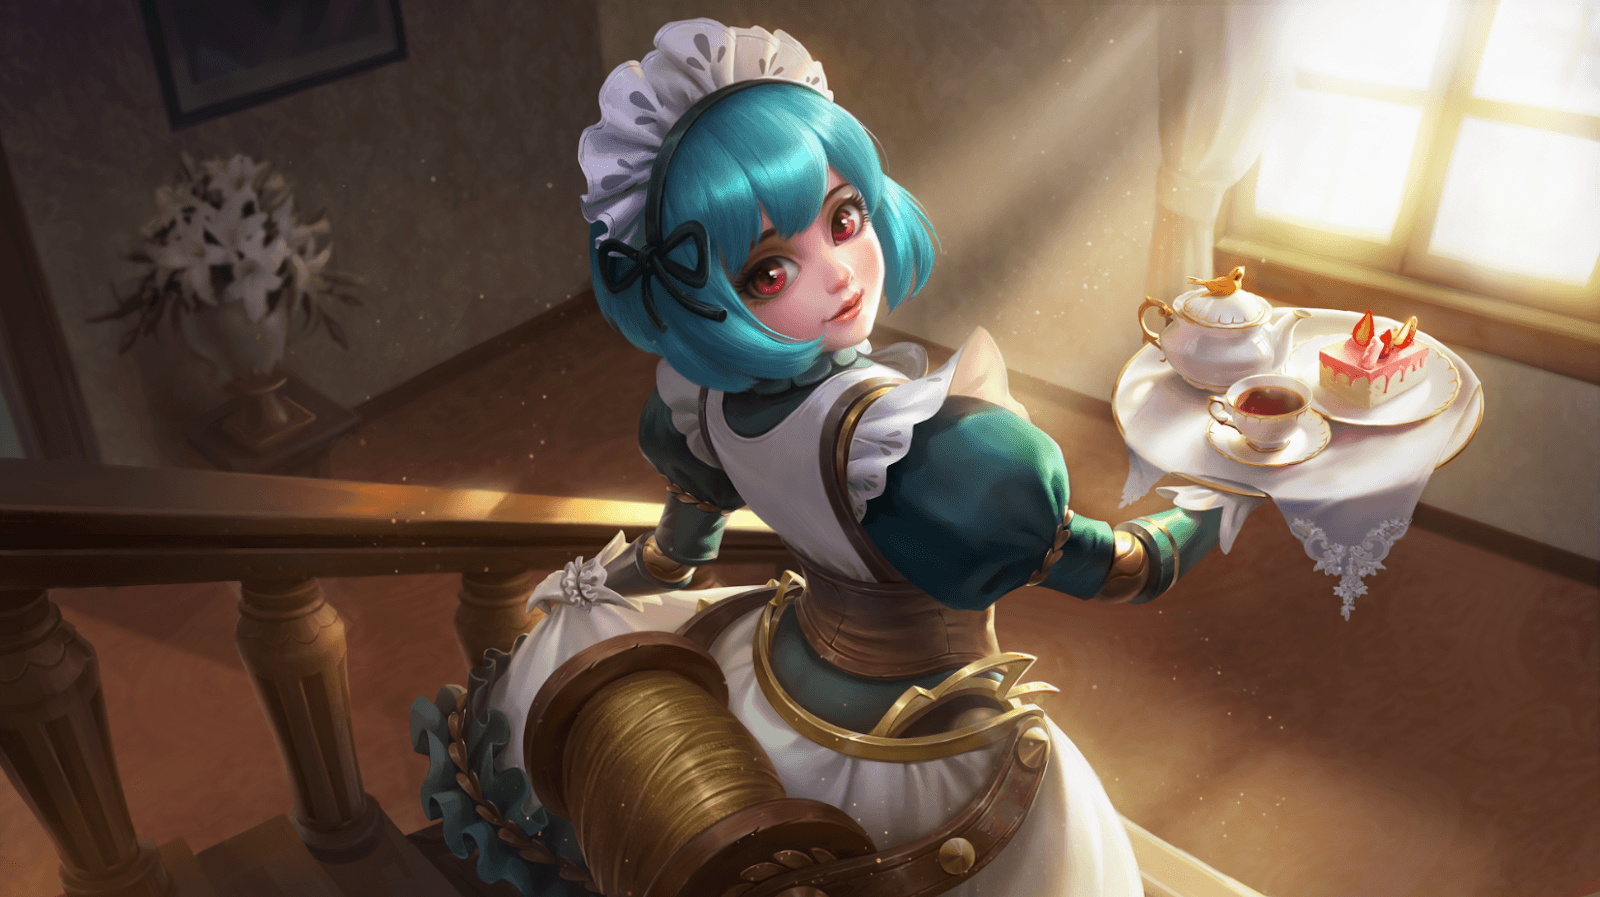 Best Mobile Legends Wallpapers. You Must Have This!